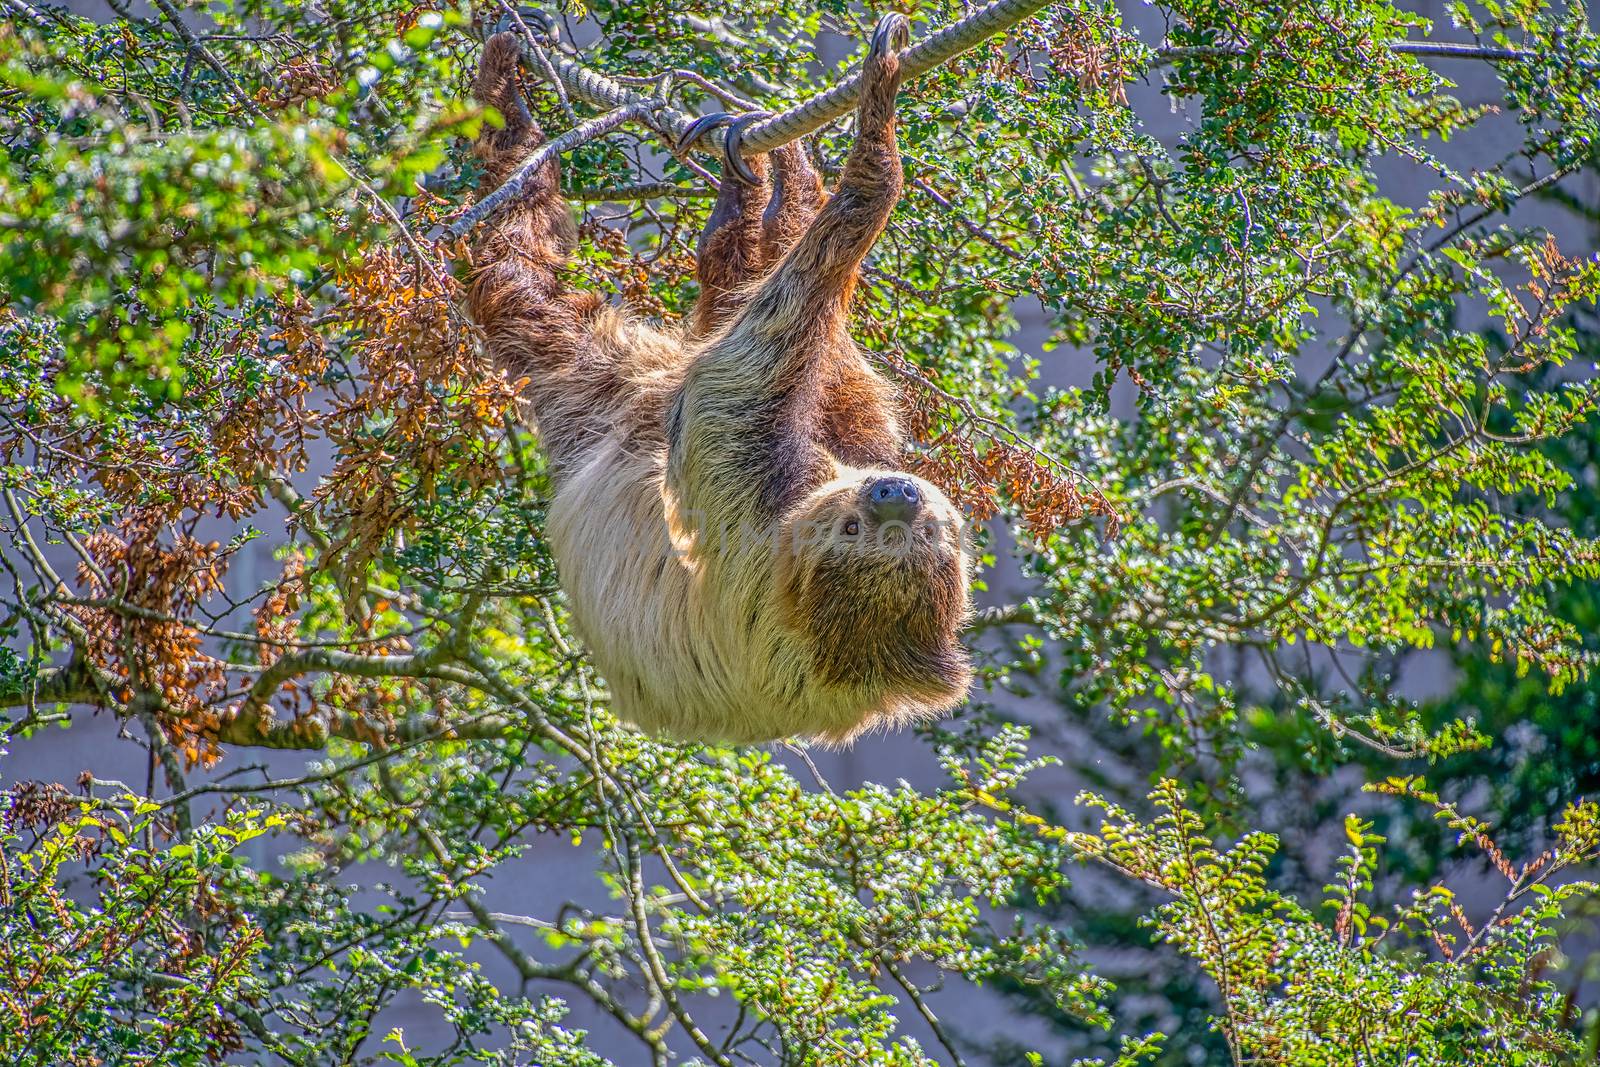 Two toed sloth slowley crawling along some rope